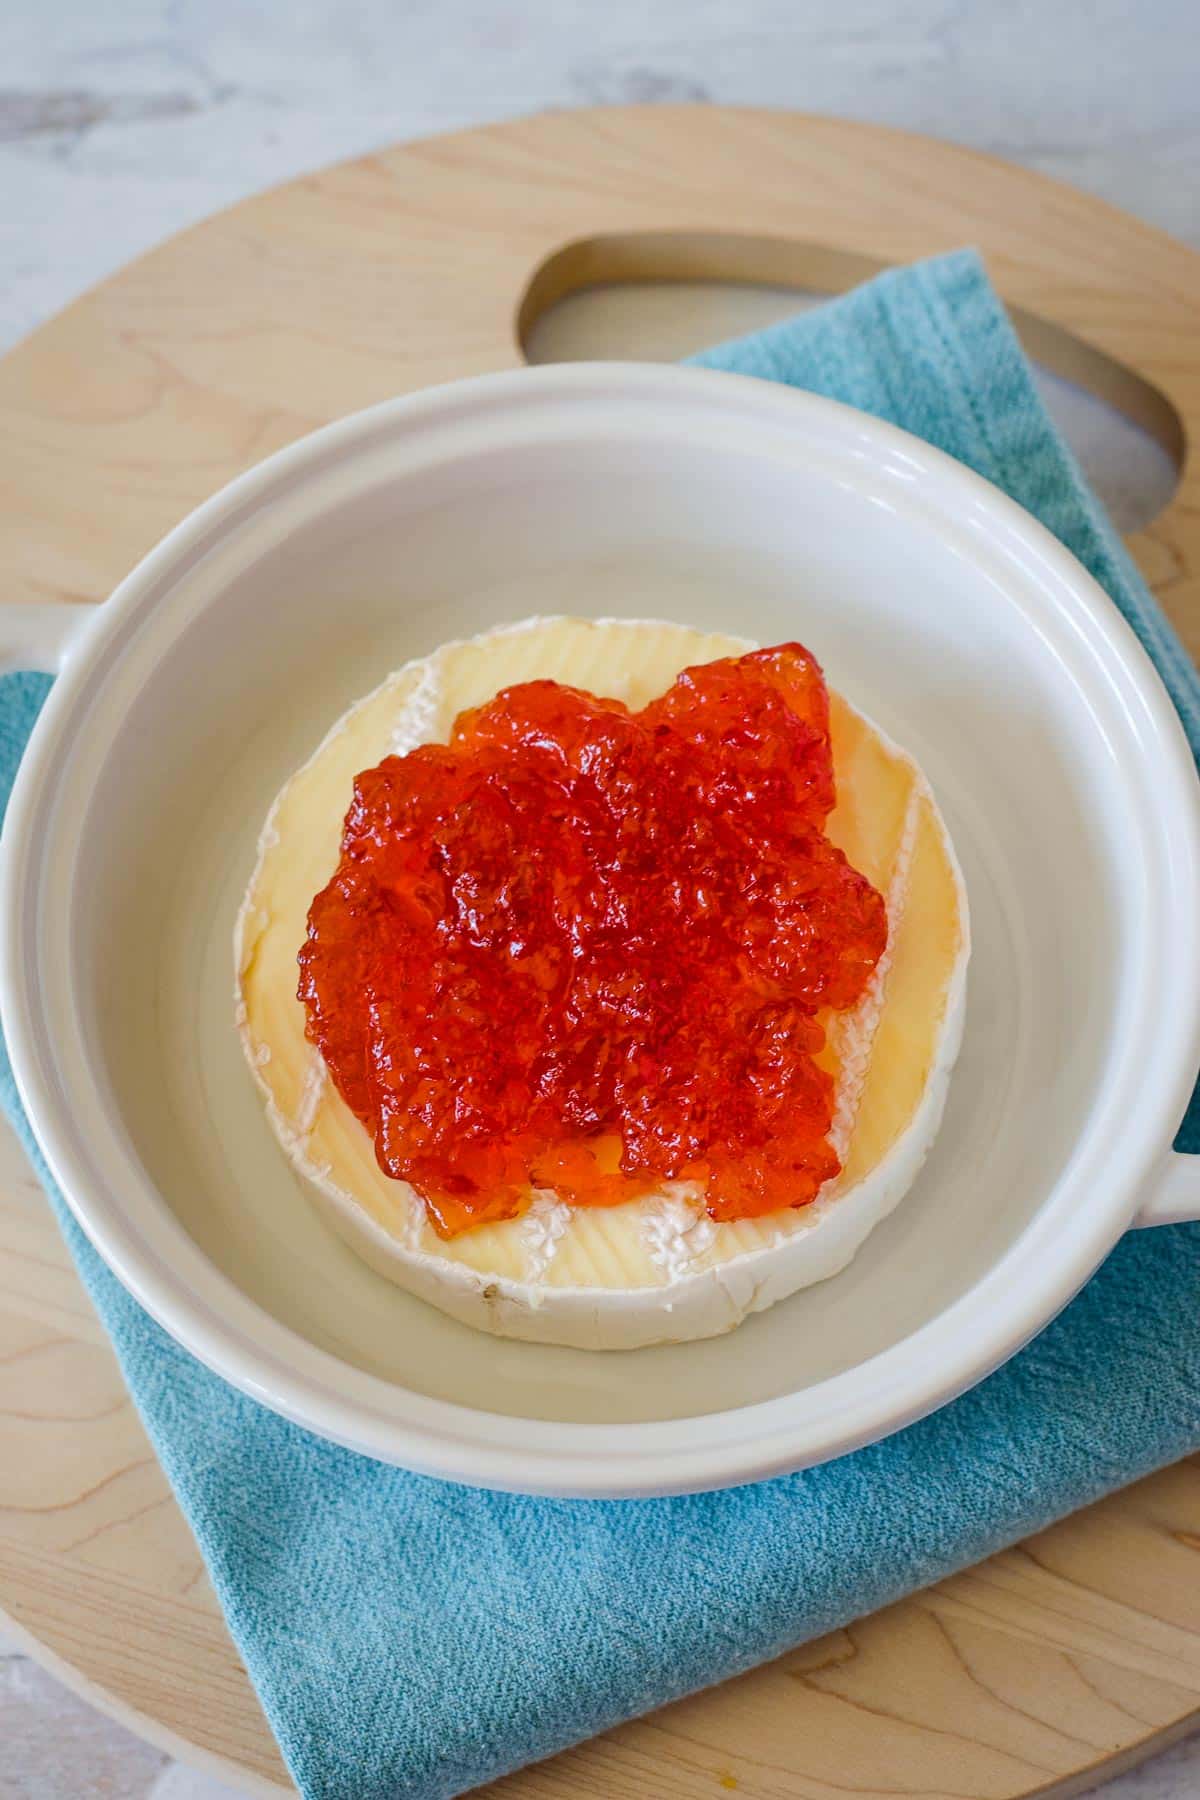 Brie topped with red pepper jelly in baking dish